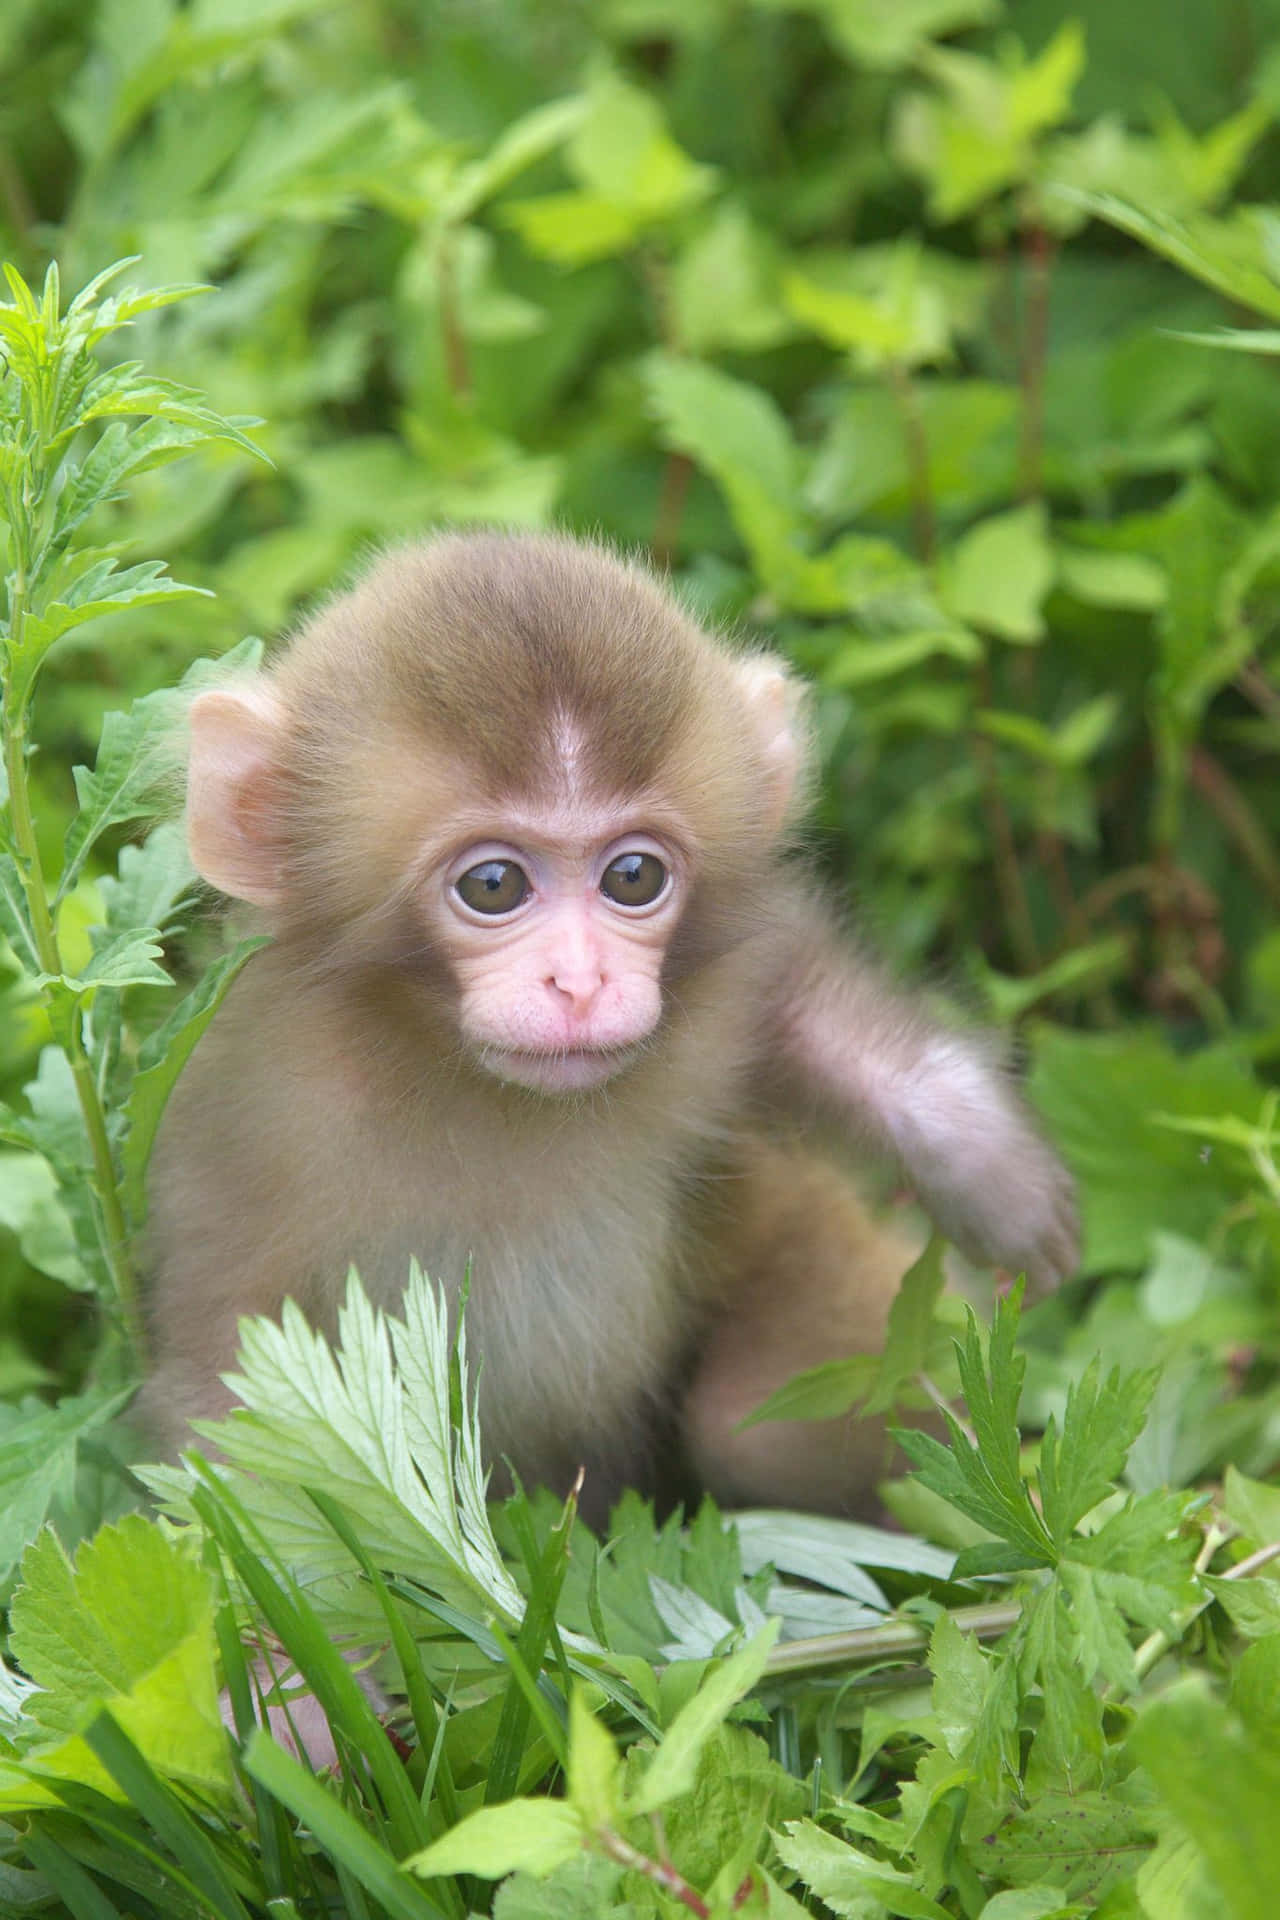 This little monkey is looking for fun!